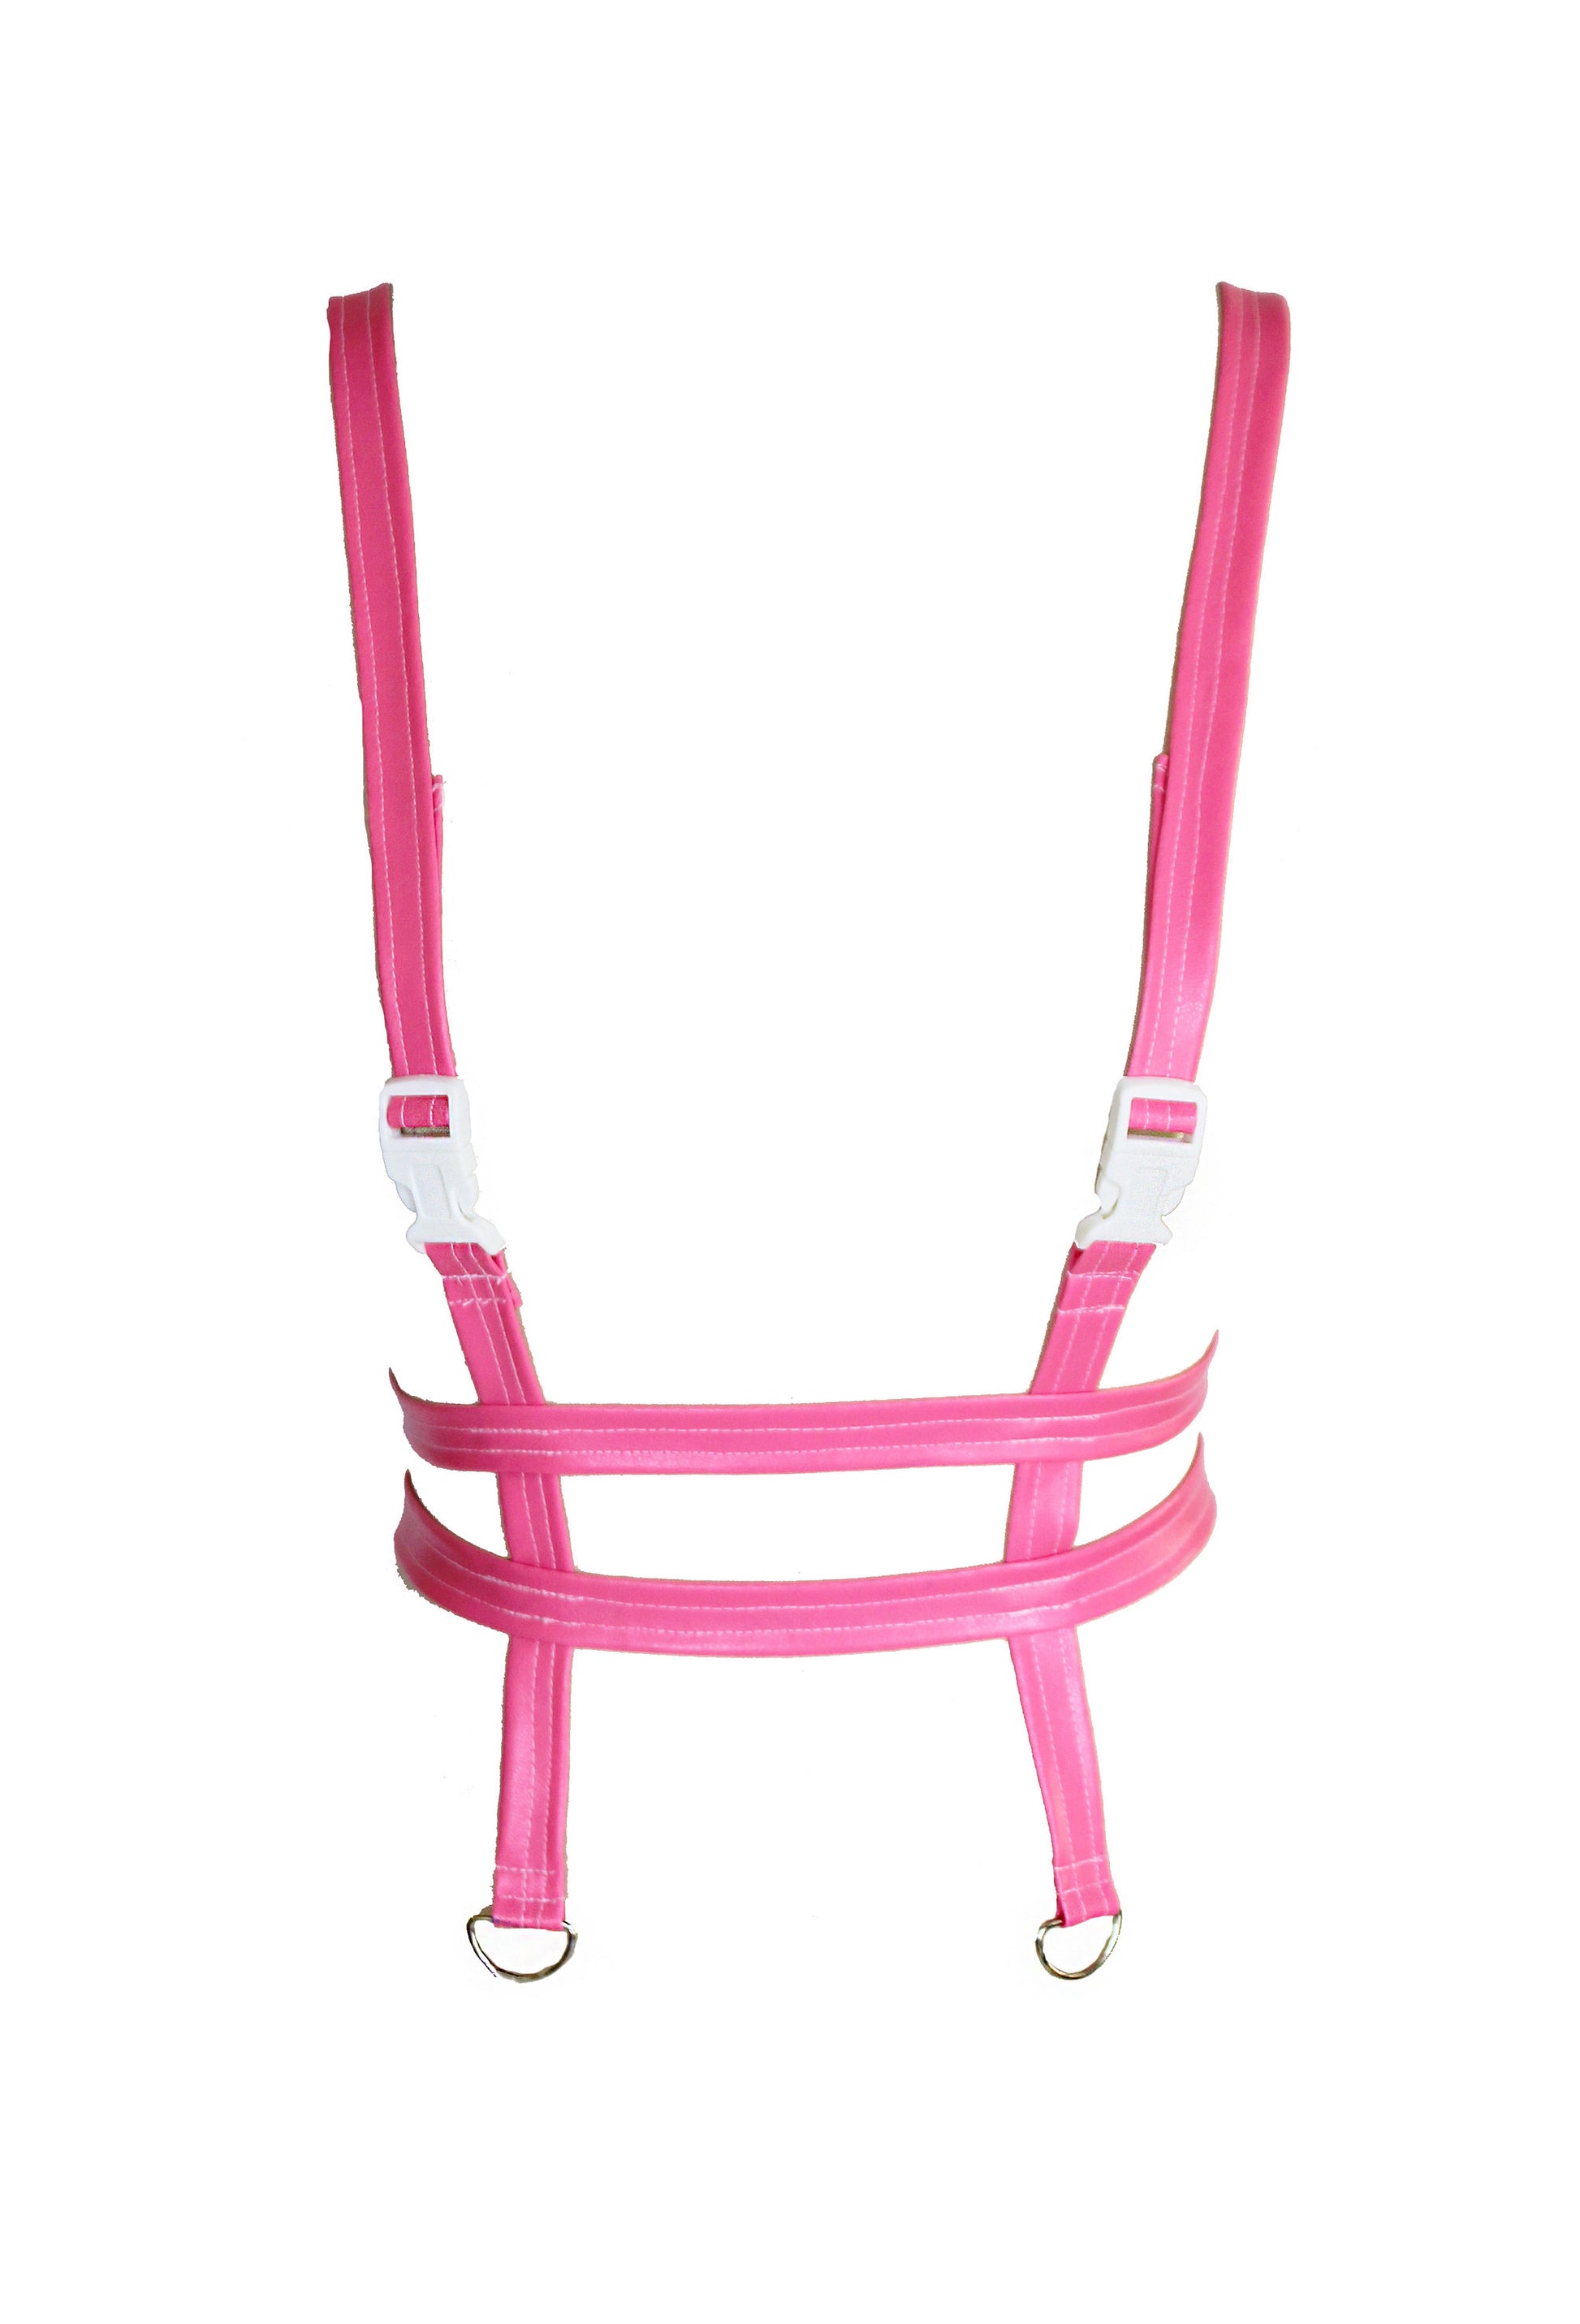 Pink Leather Chain Harness Bra, Woman Bdsm Harness, Chest Harness